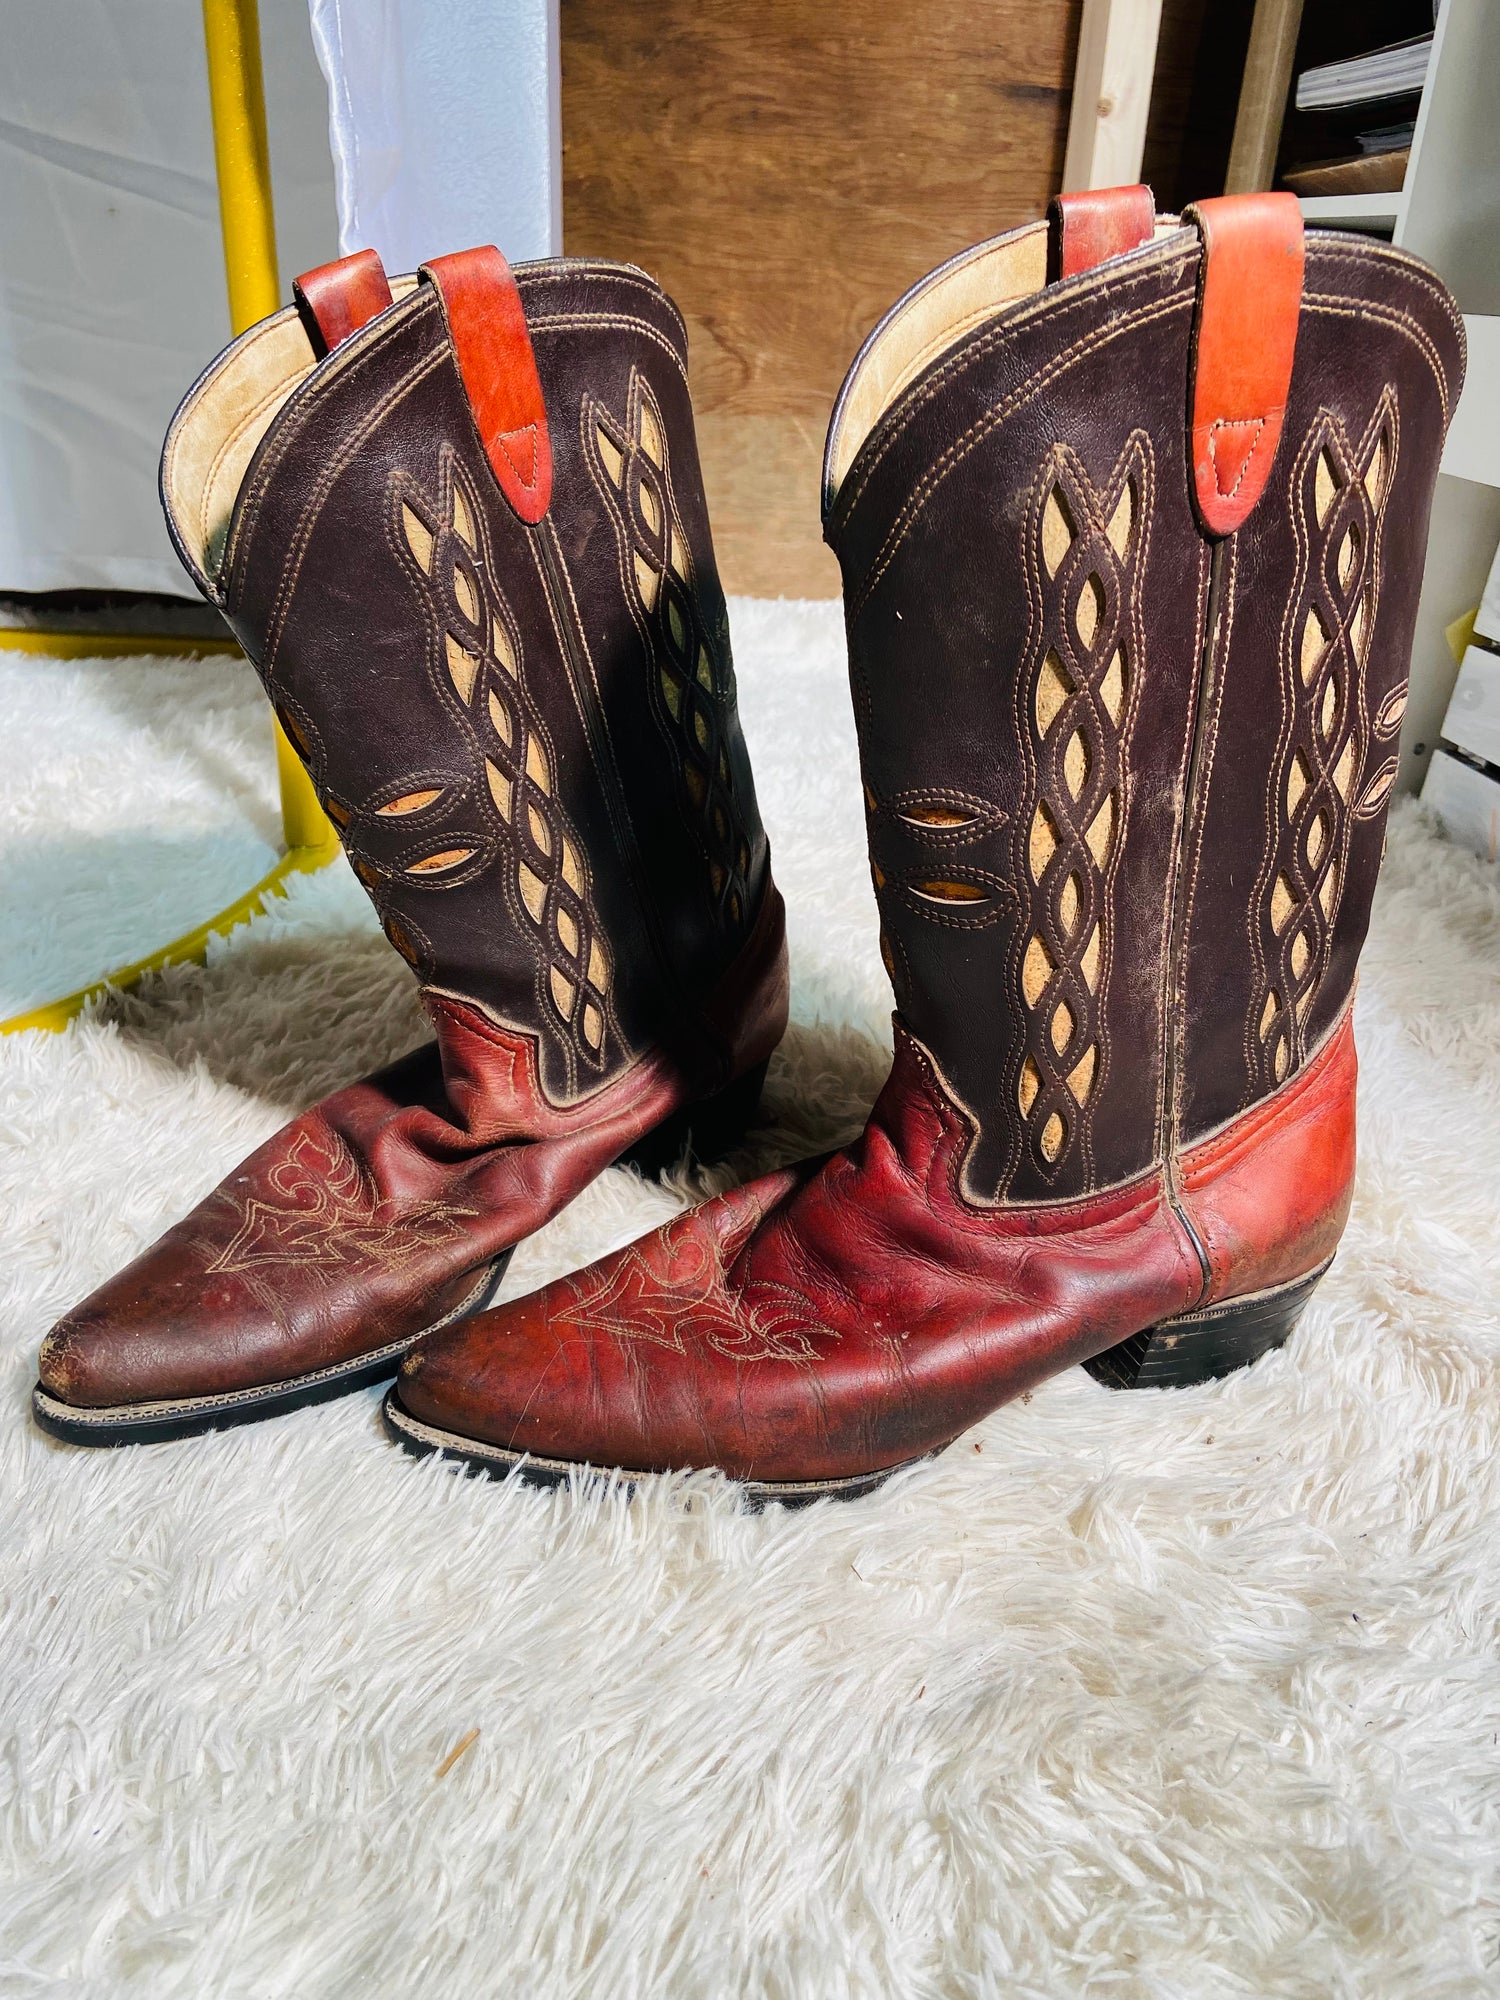 Used riding boots